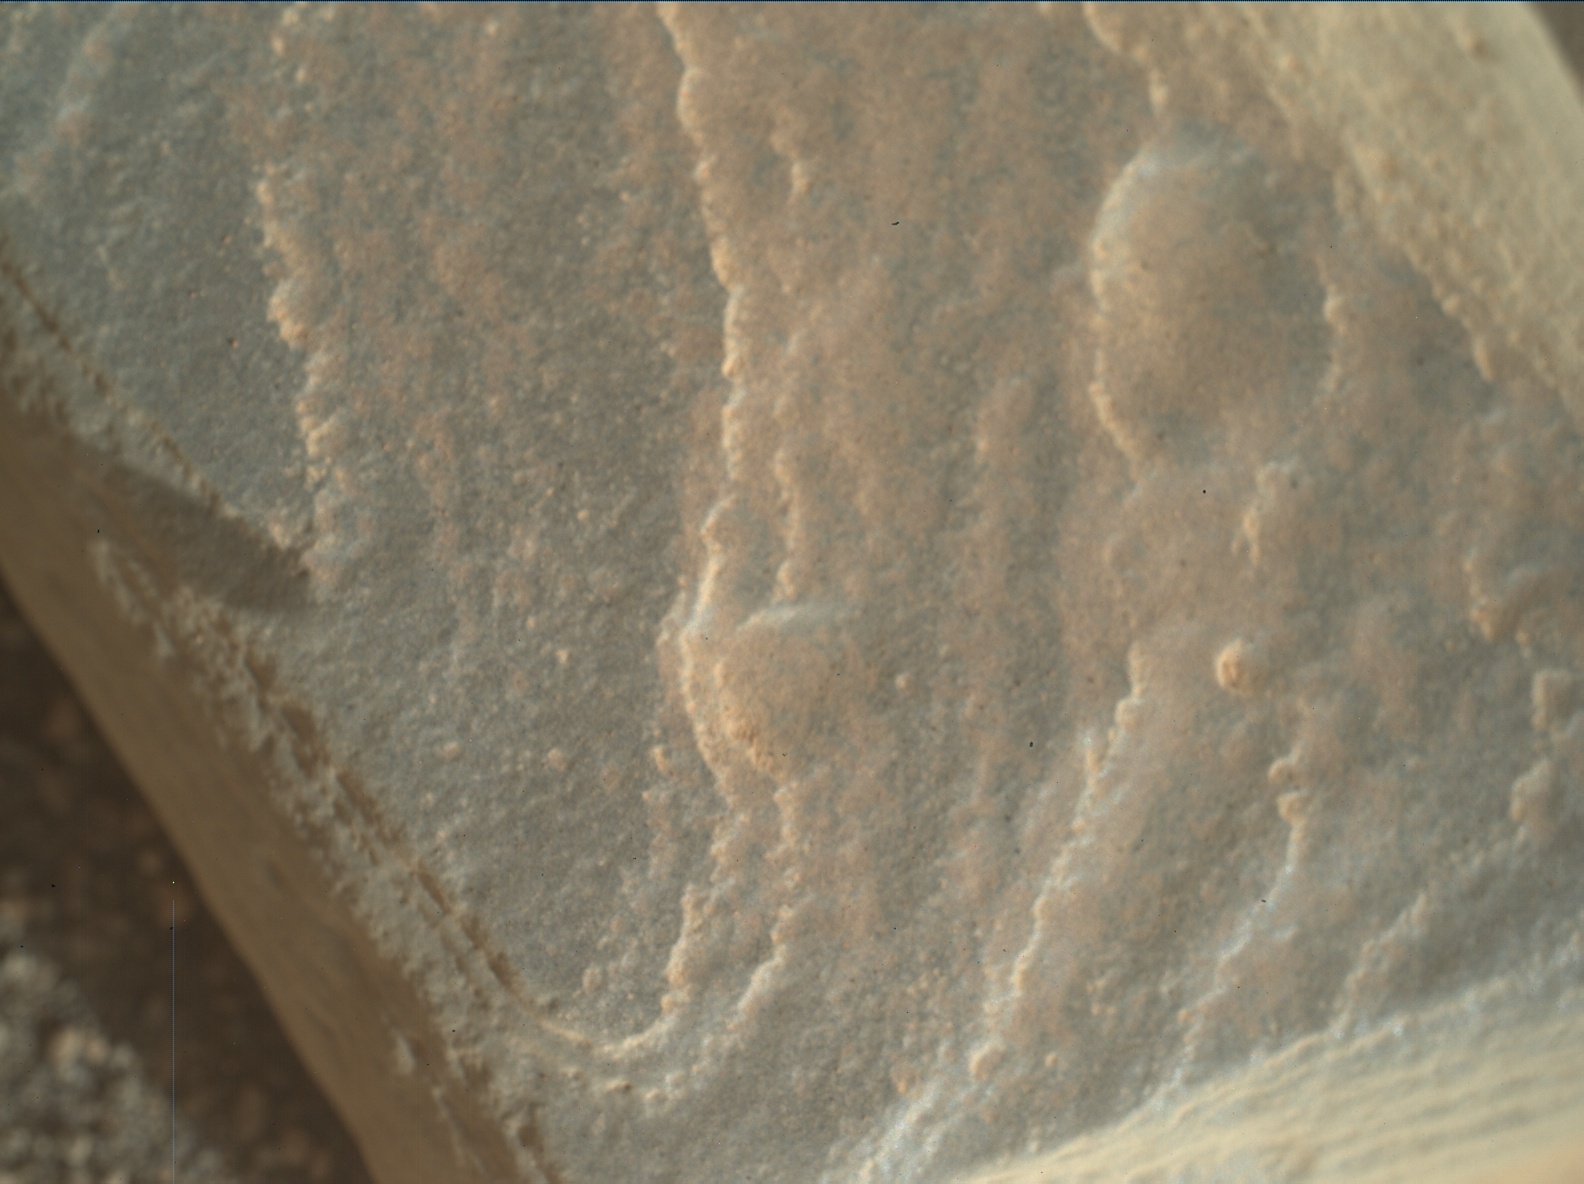 Nasa's Mars rover Curiosity acquired this image using its Mars Hand Lens Imager (MAHLI) on Sol 3208